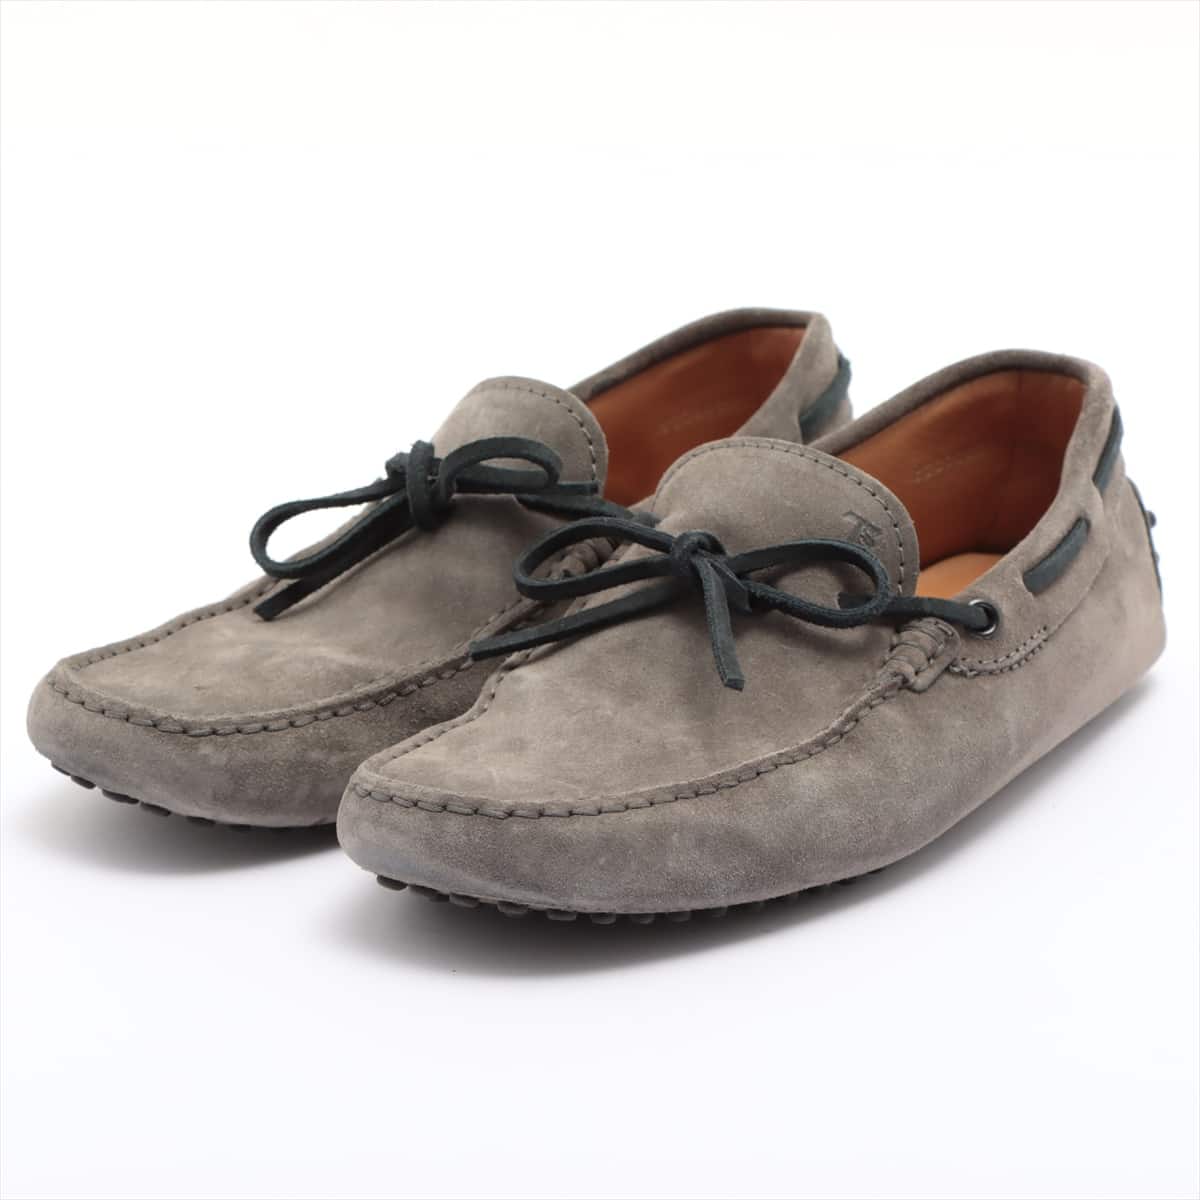 Tod's Suede Driving shoes 6.5 Men's Grey